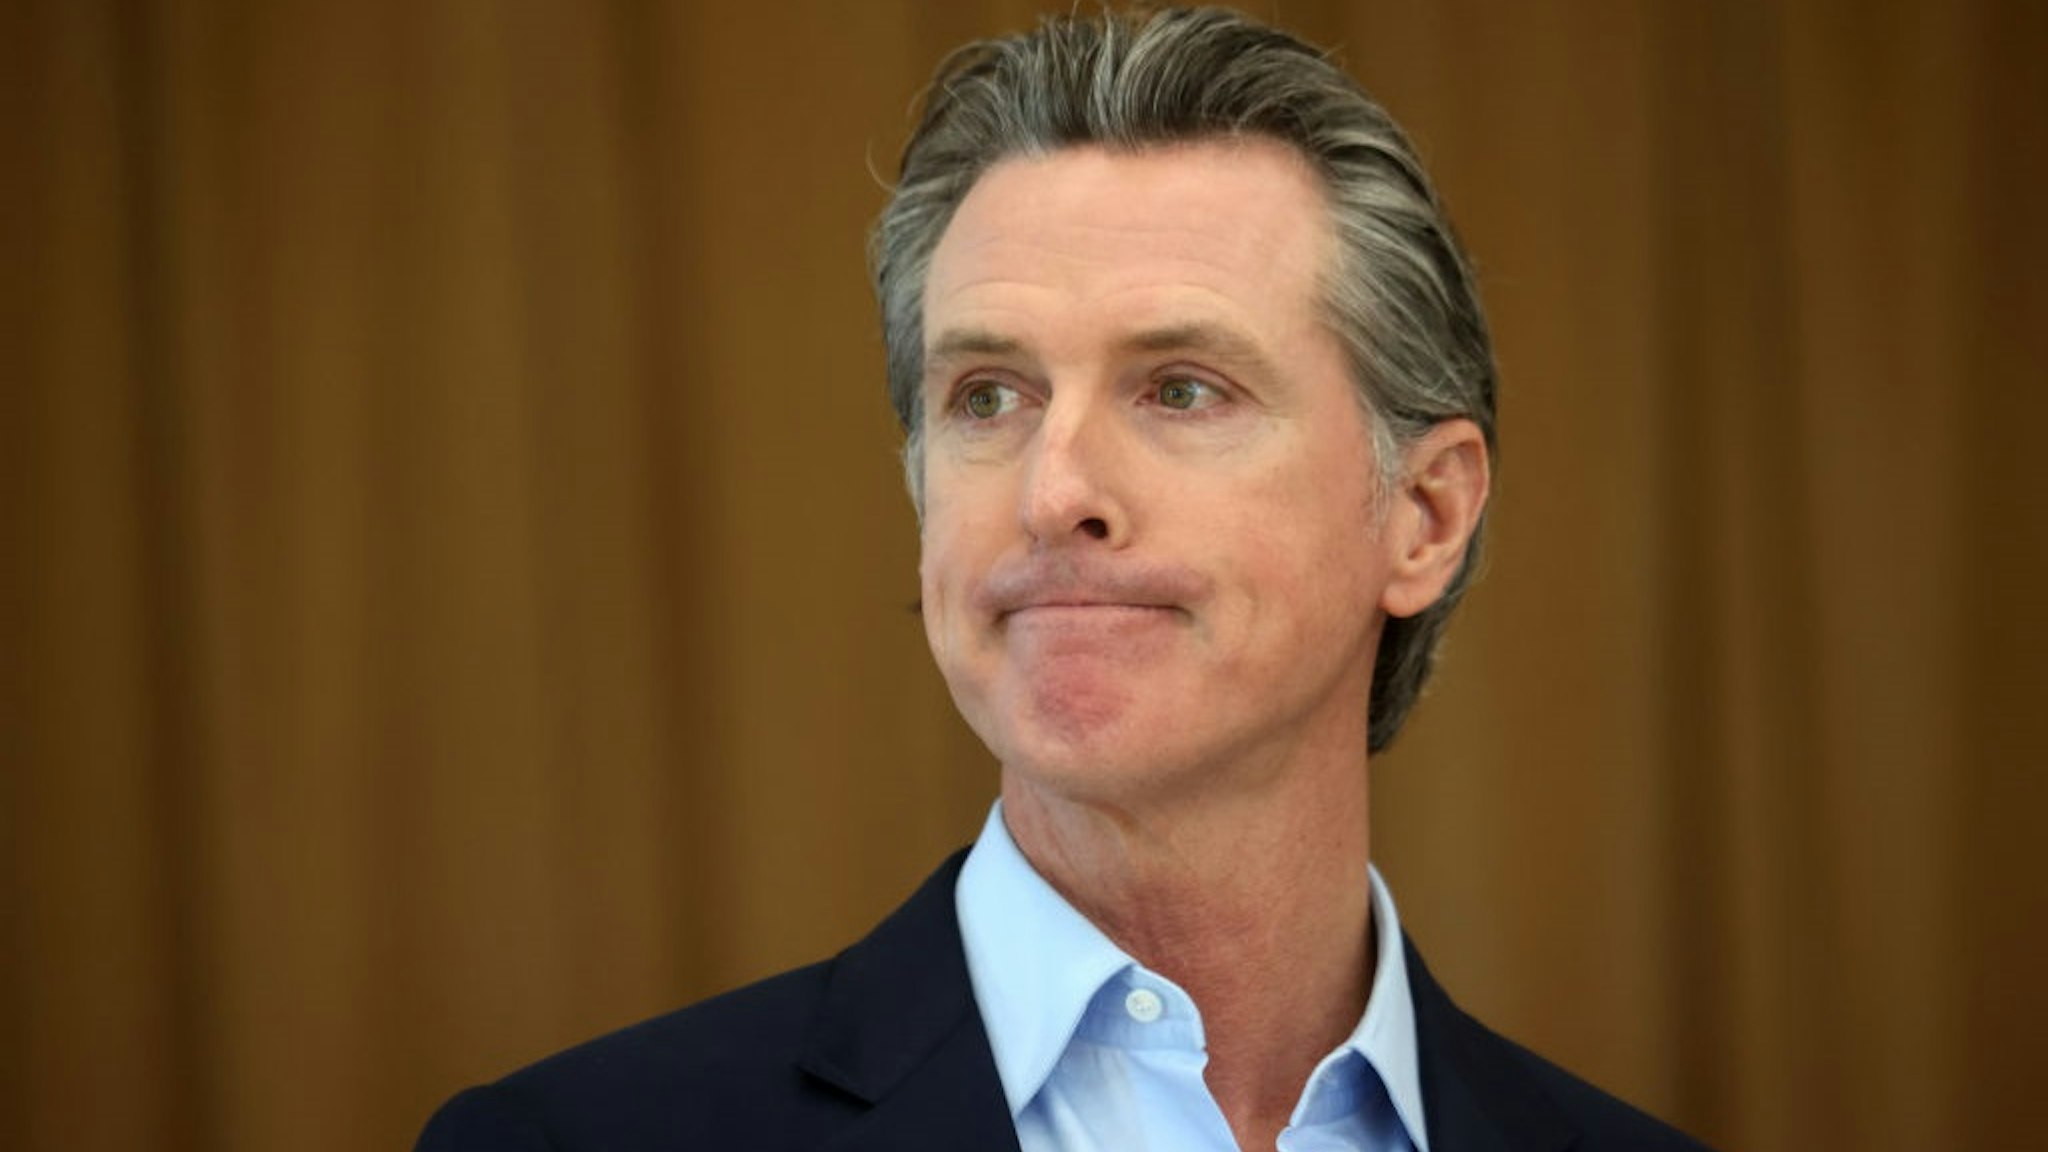 ALAMEDA, CALIFORNIA - MARCH 16: California Gov. Gavin Newsom looks on during a news conference after he toured the newly reopened Ruby Bridges Elementary School on March 16, 2021 in Alameda, California.